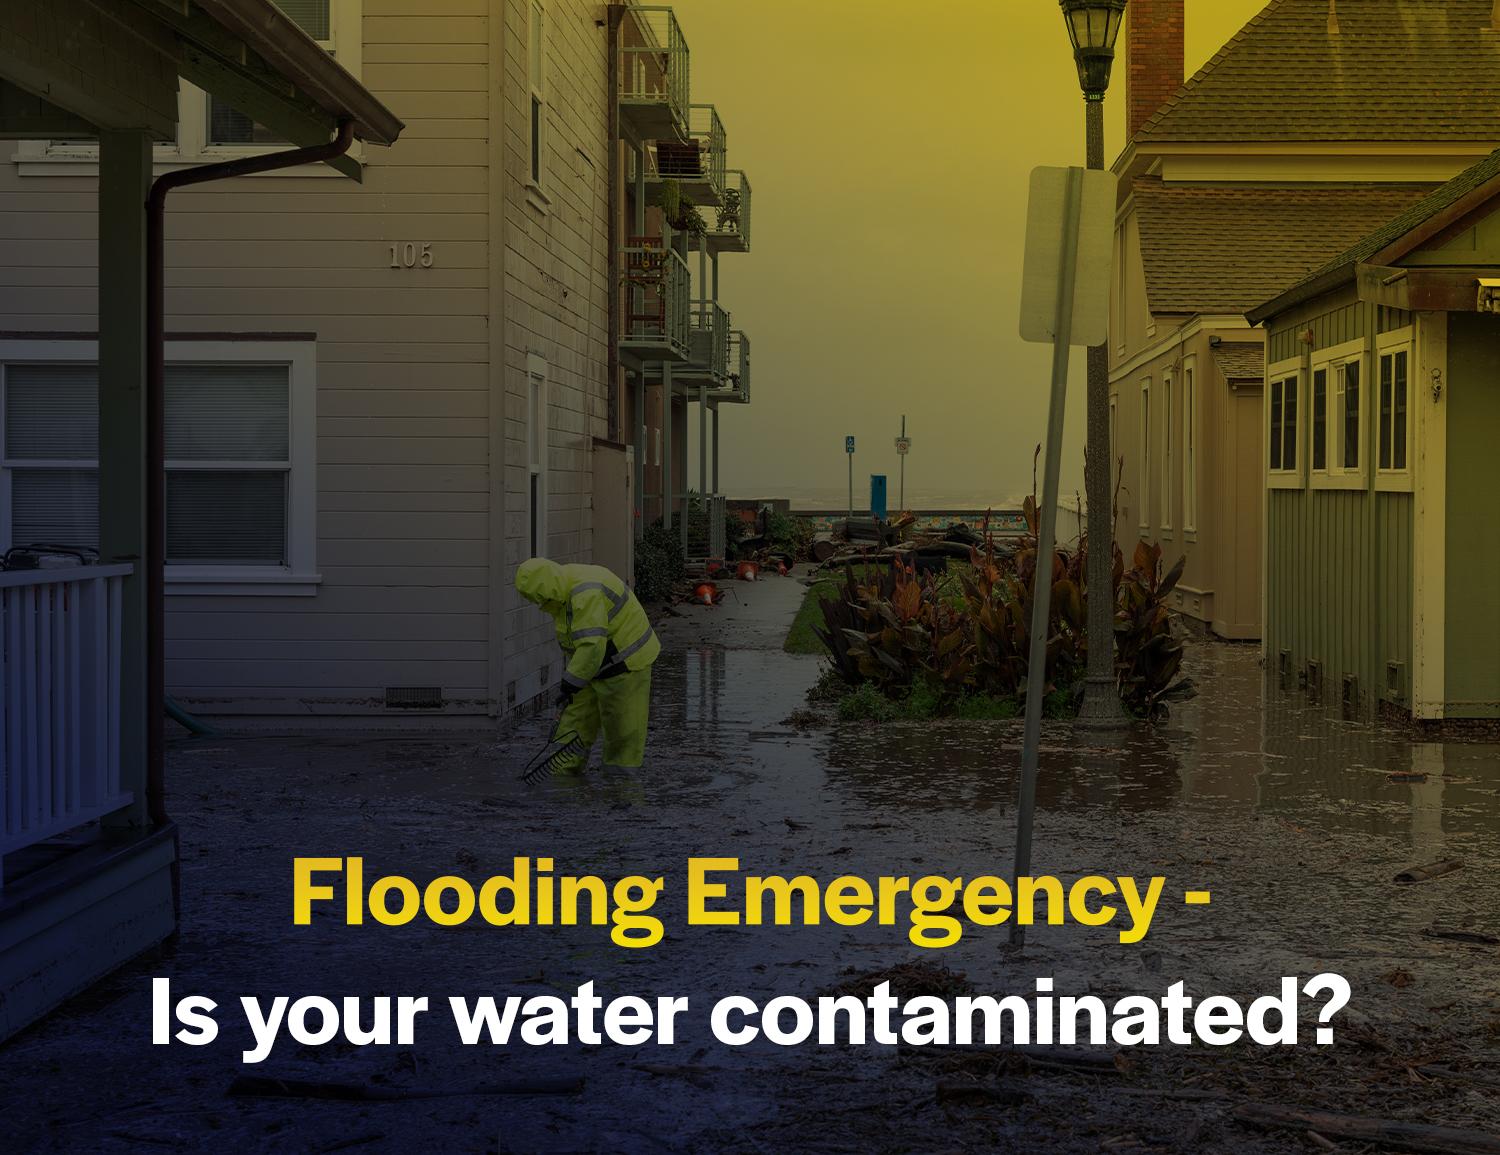 Flooding Emergency - Is your water contaminated?